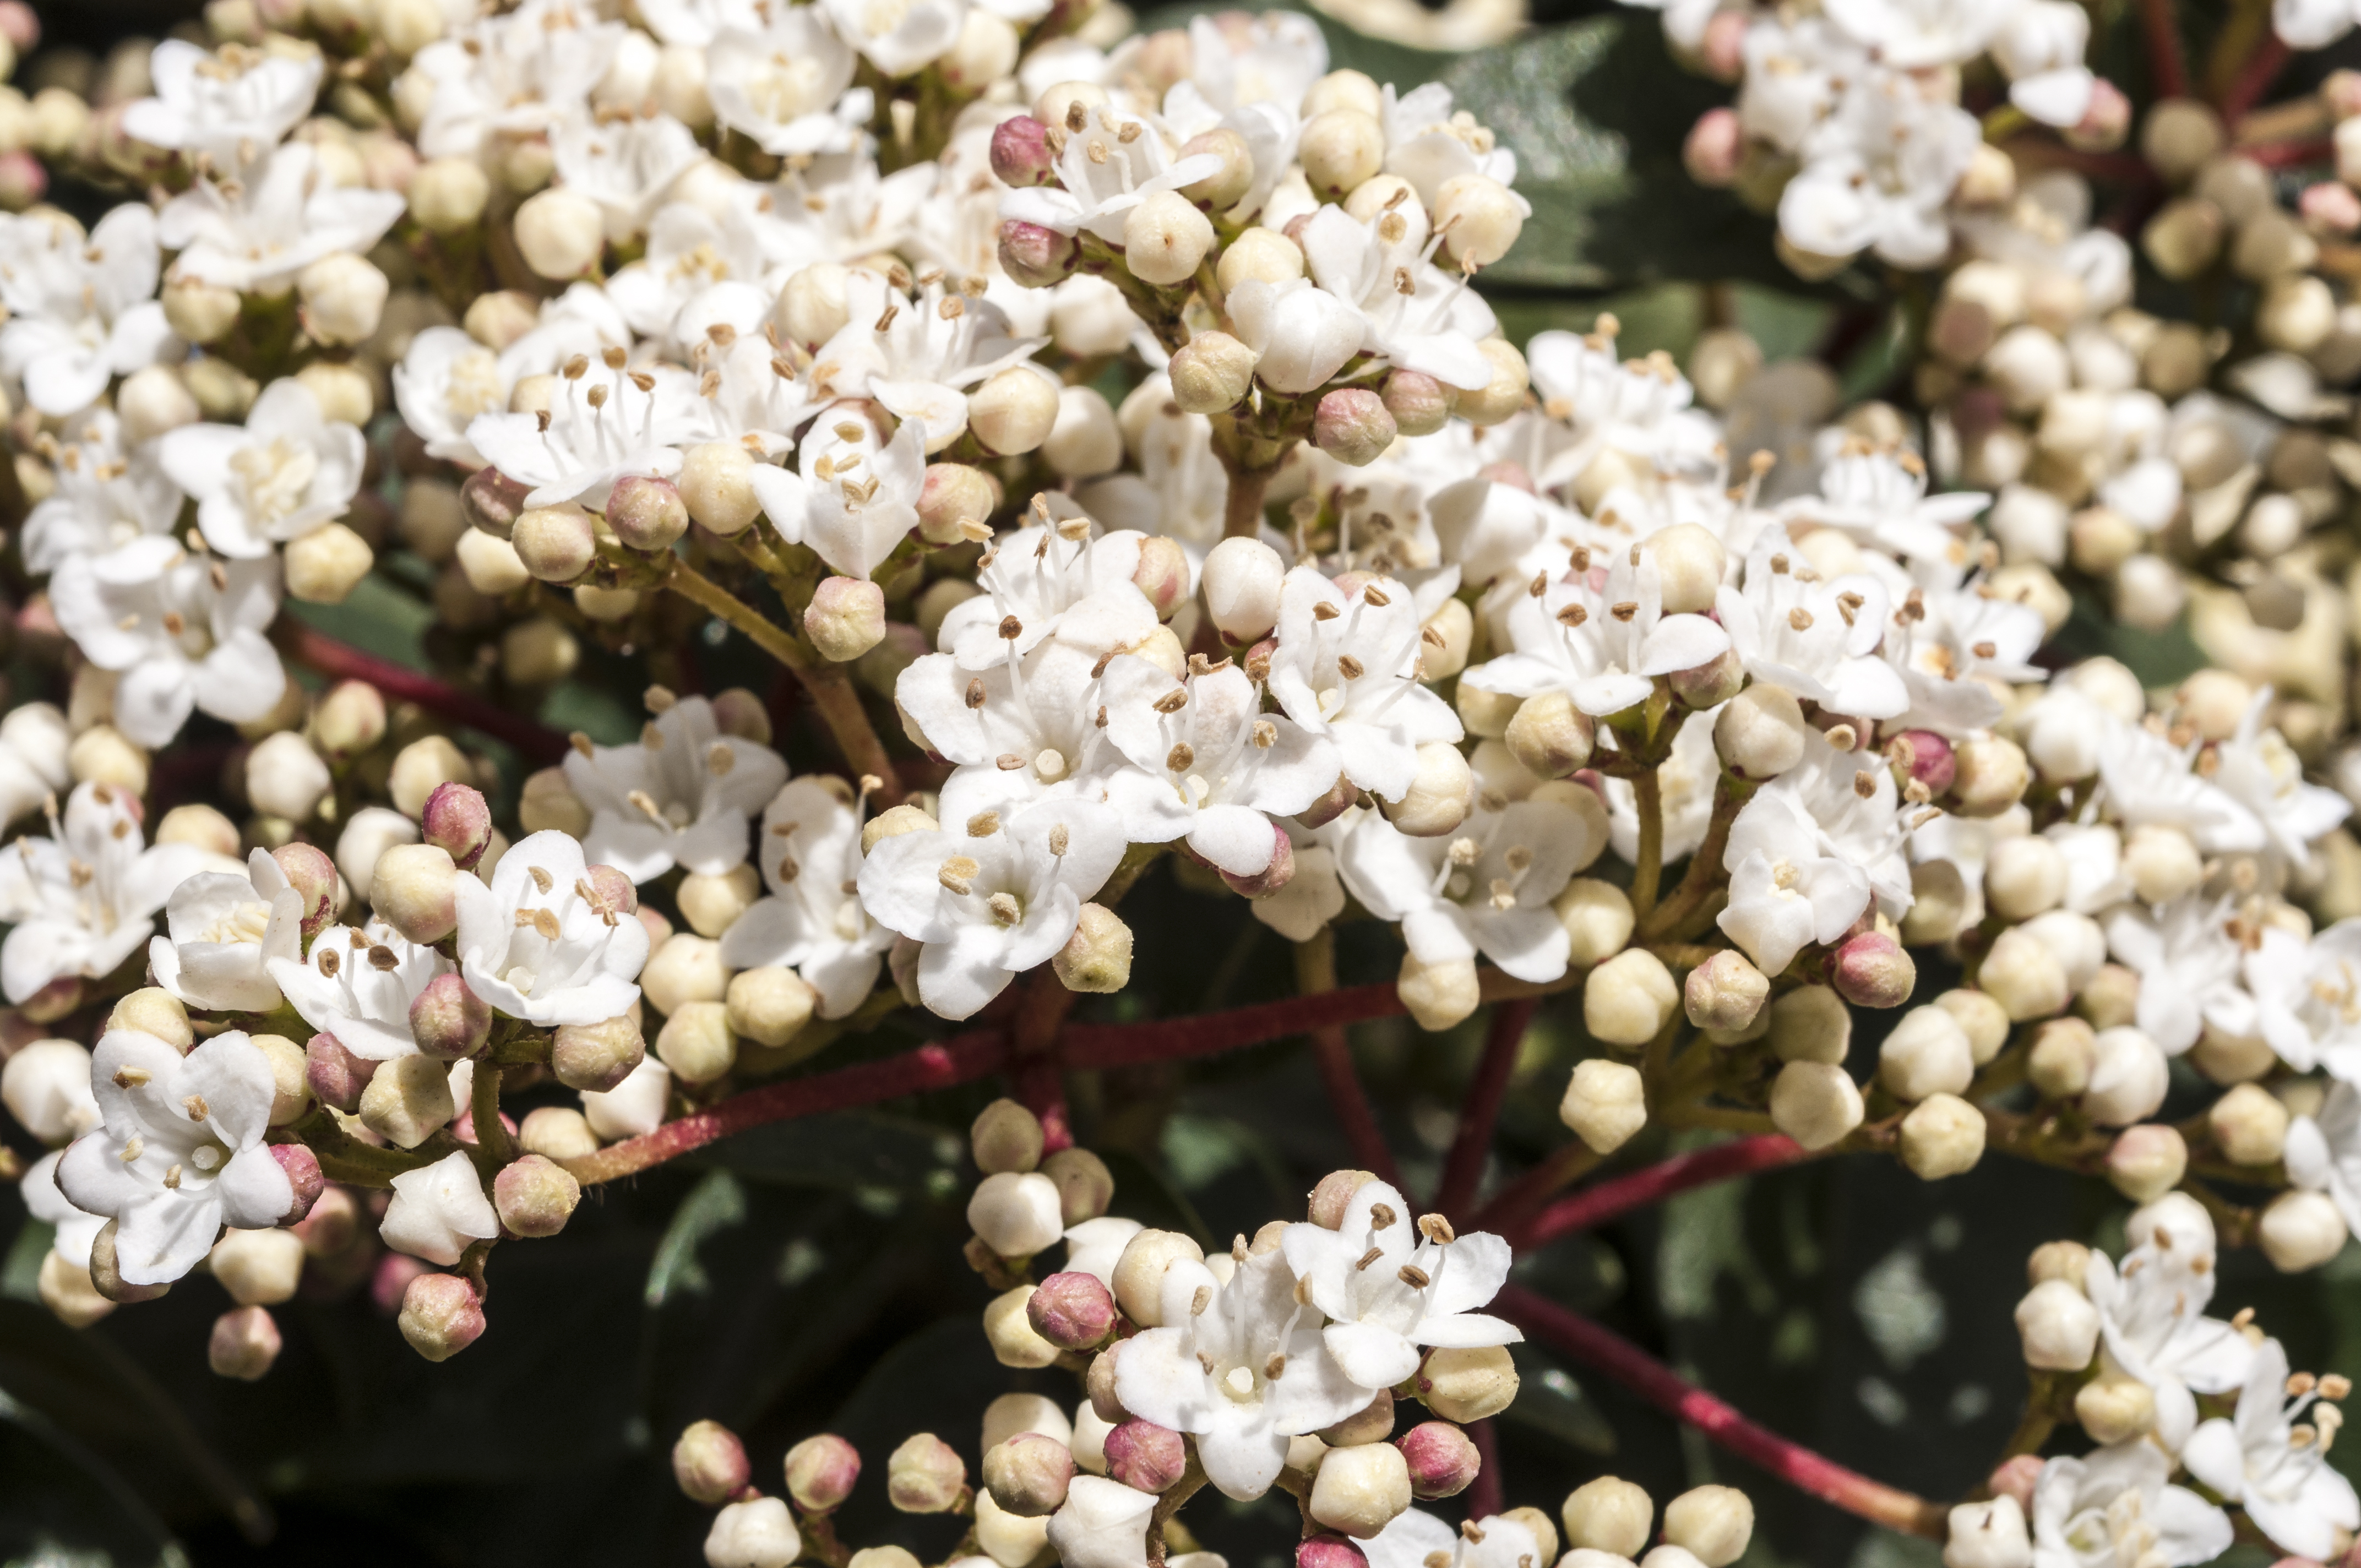 Viburnum tinus can do well in dry shade (Thinkstock/PA)